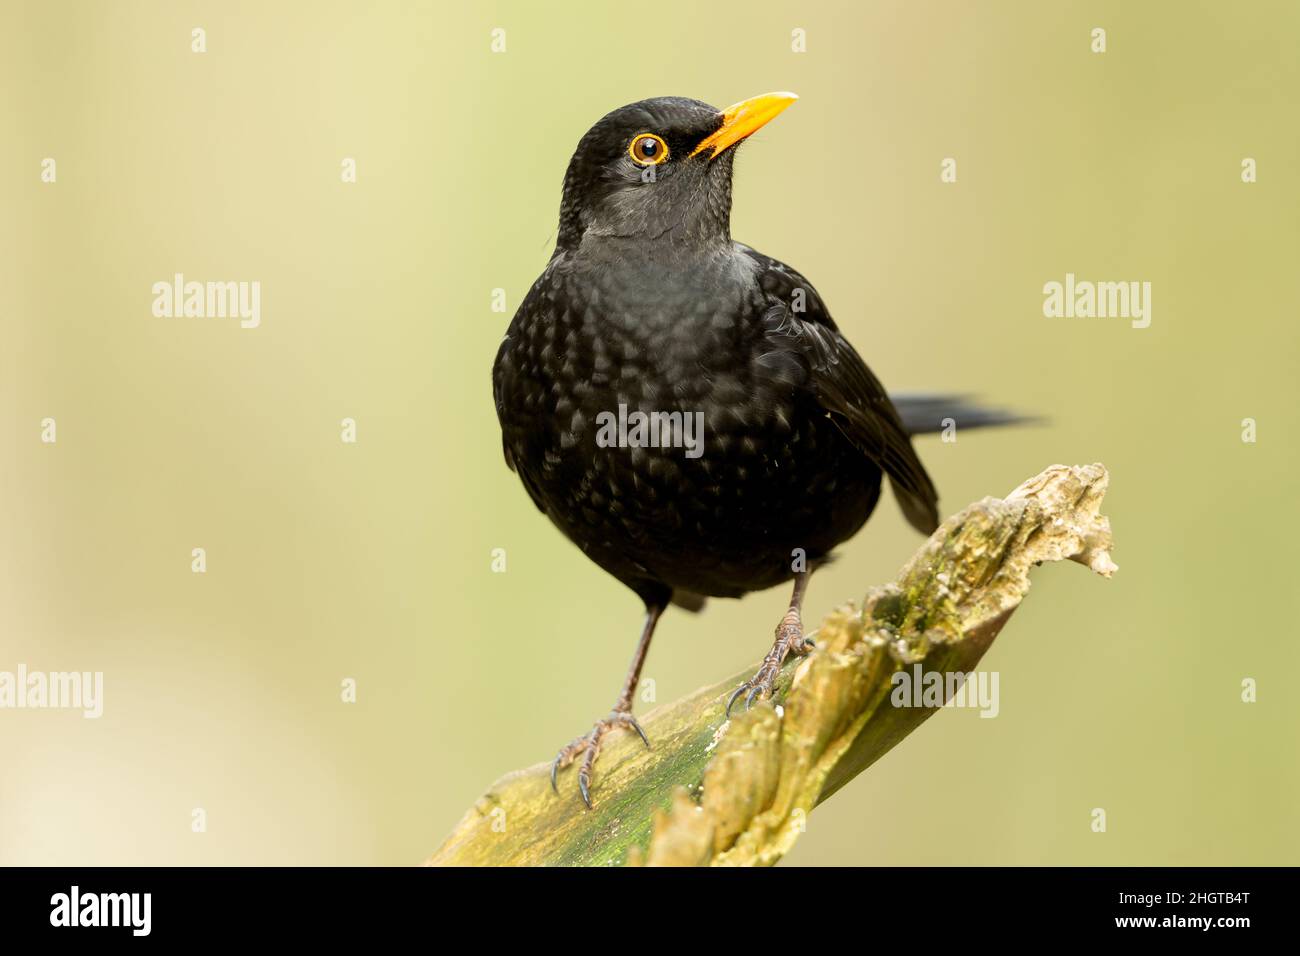 Blackbird.  Scientific name: Turdus merula. Close up of a male blackbird perched on a broken branch and looking to the right.  Clean background.  Copy Stock Photo